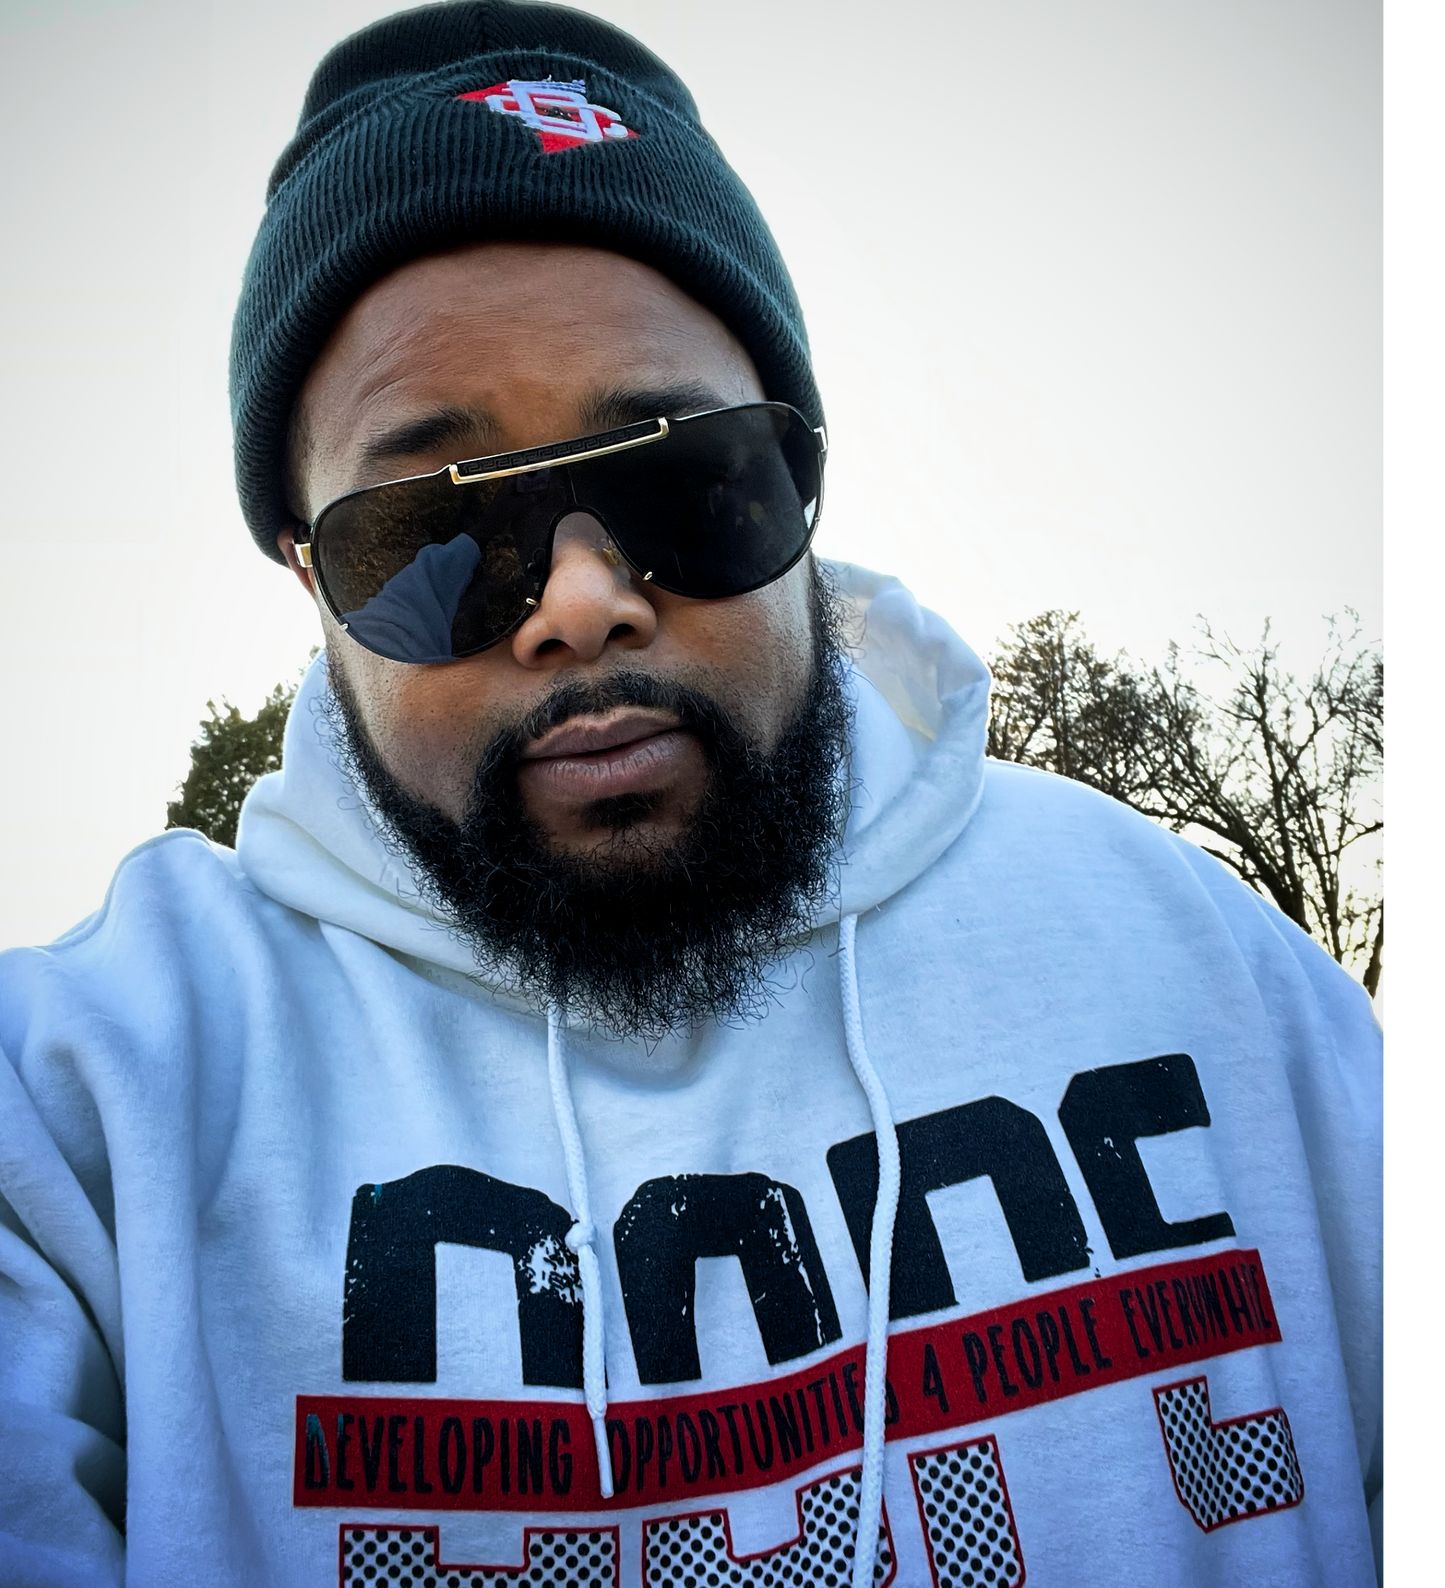 2021 & 2022 Crime rates in Washington DC  irrupt all the while  inspiring The Great. This Dope Vintage Red Tape sweatshirt hoodie represents all the Men & Women we've lost to senseless gunfire and violent crimes not just in our own city but cities across the nation. We stand for "Developing Opportunities for People Everywhere" and we strive to do so everyday. 